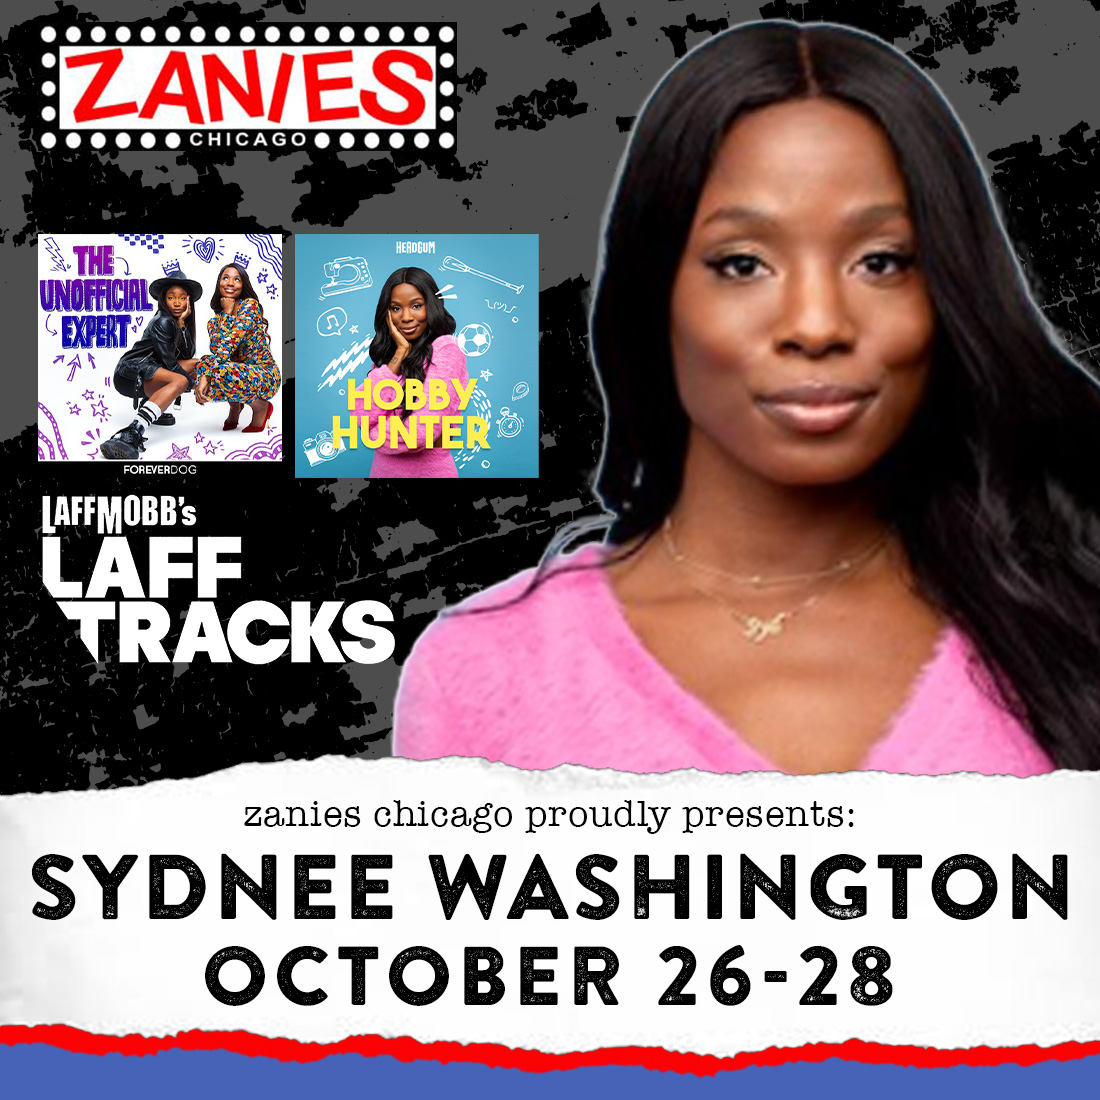 🧨 THIS WEEKEND AT ZANIES Comedian, podcaster and host @justsydnyc makes her way to Zanies this weekend, October 26-28! VERY limited tickets are still available for select shows only and will sell out, Chicago. Grab tix while you can--> bit.ly/Chicago_Syndee